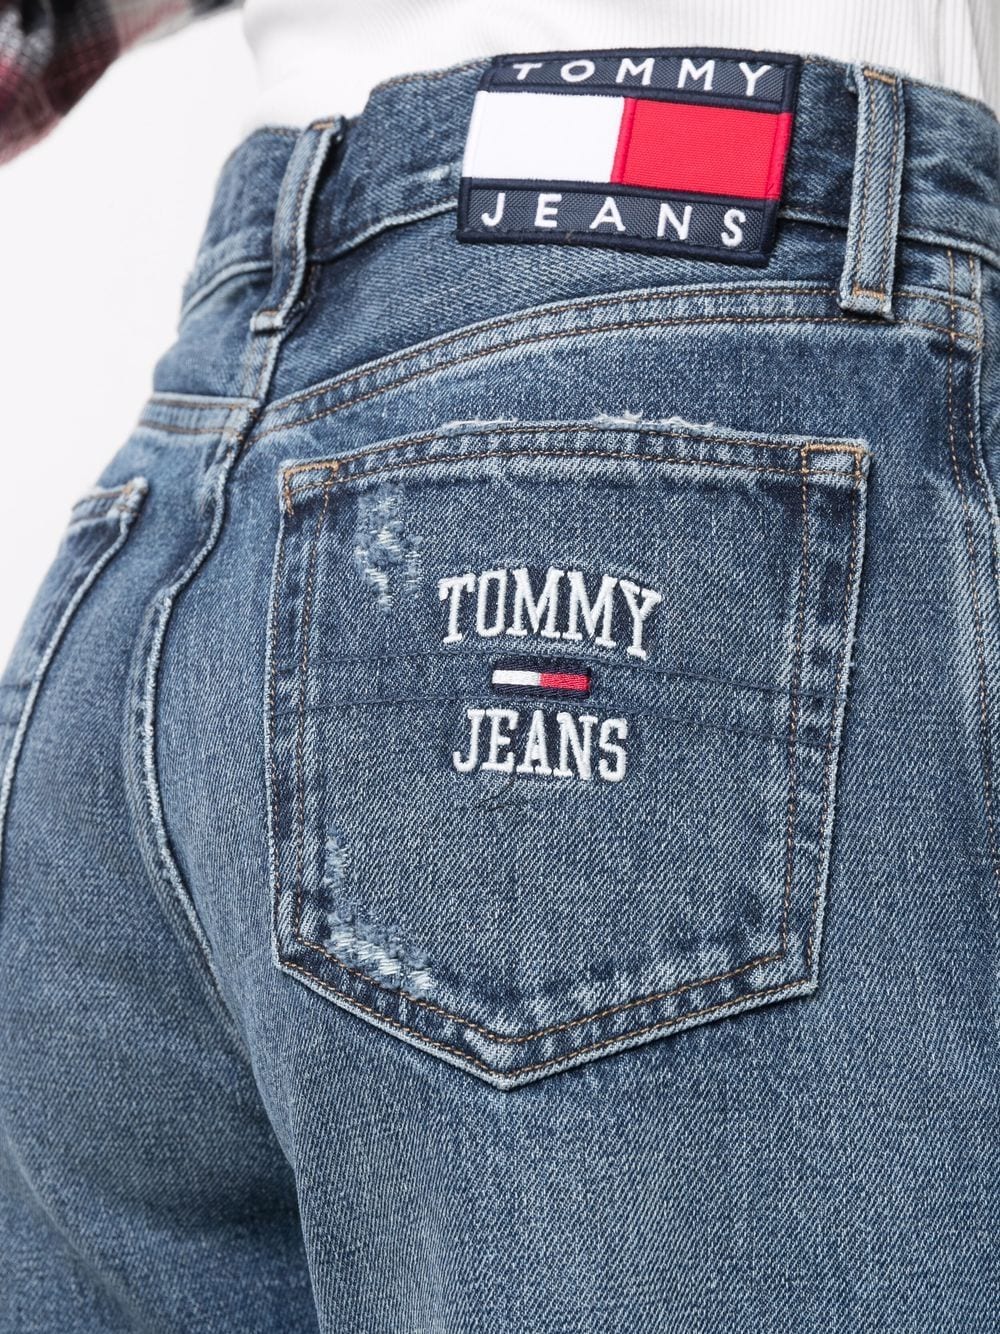 Jeans - Jeans Detail Tommy Farfetch embroidered-logo